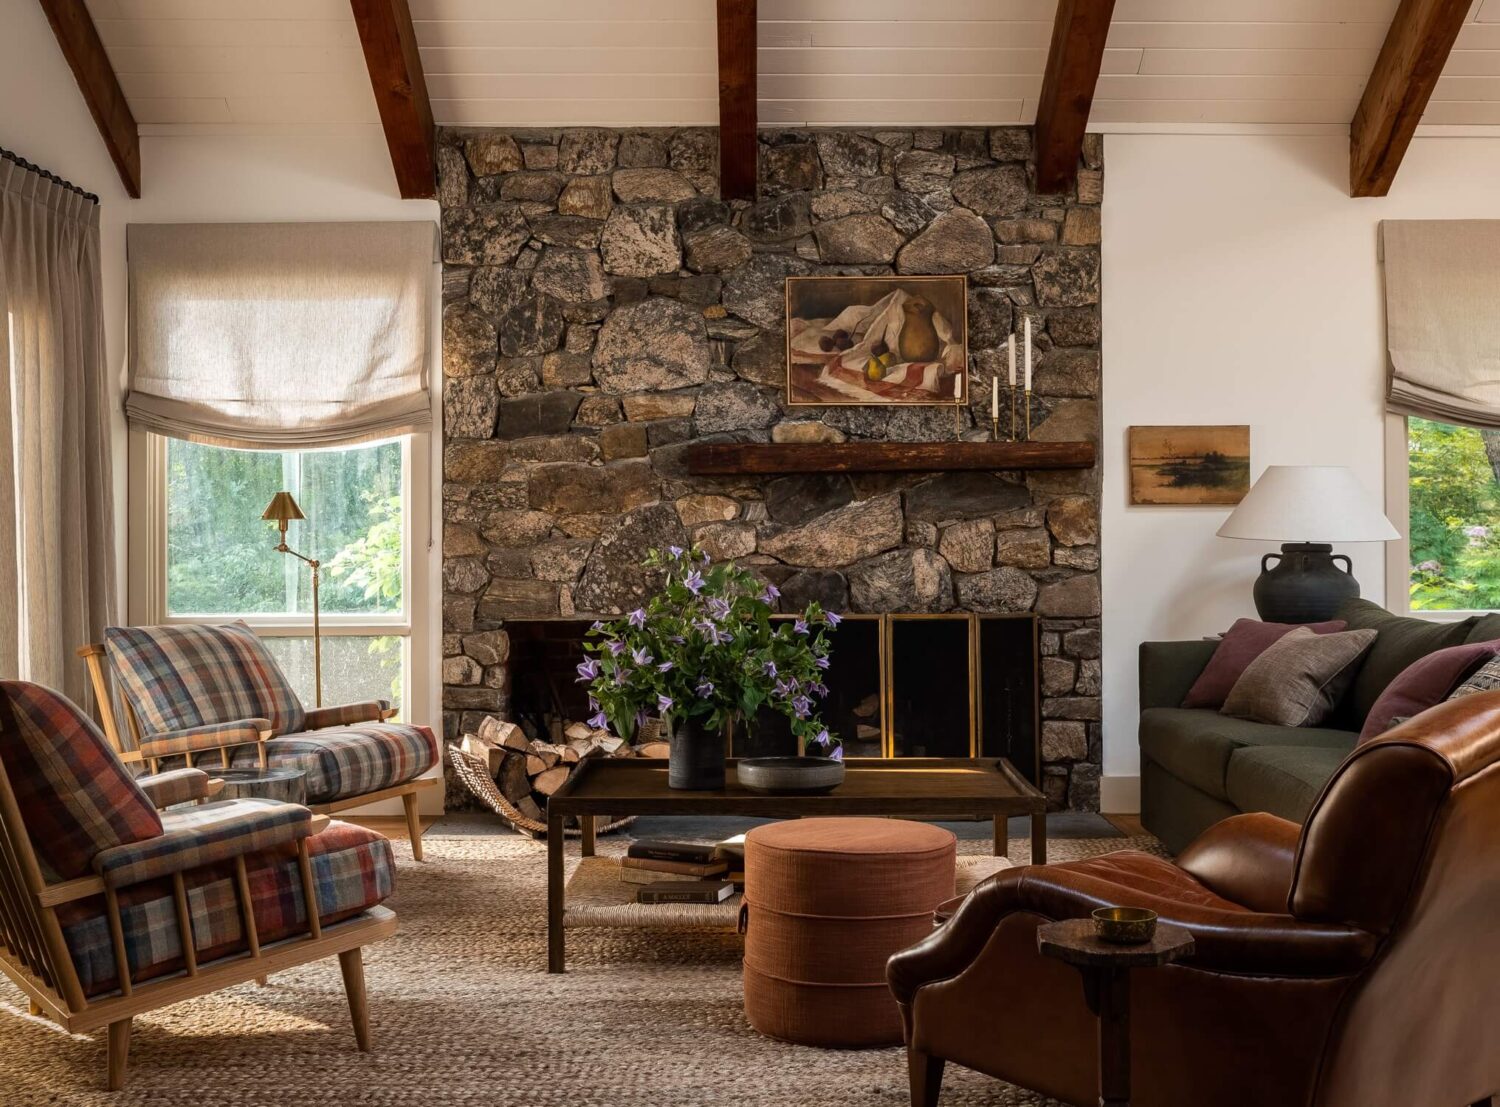 Heidi-Caillier-Design-CT-country-house-Dutchess-County-design-living-room-stone-fireplace-Nordroom